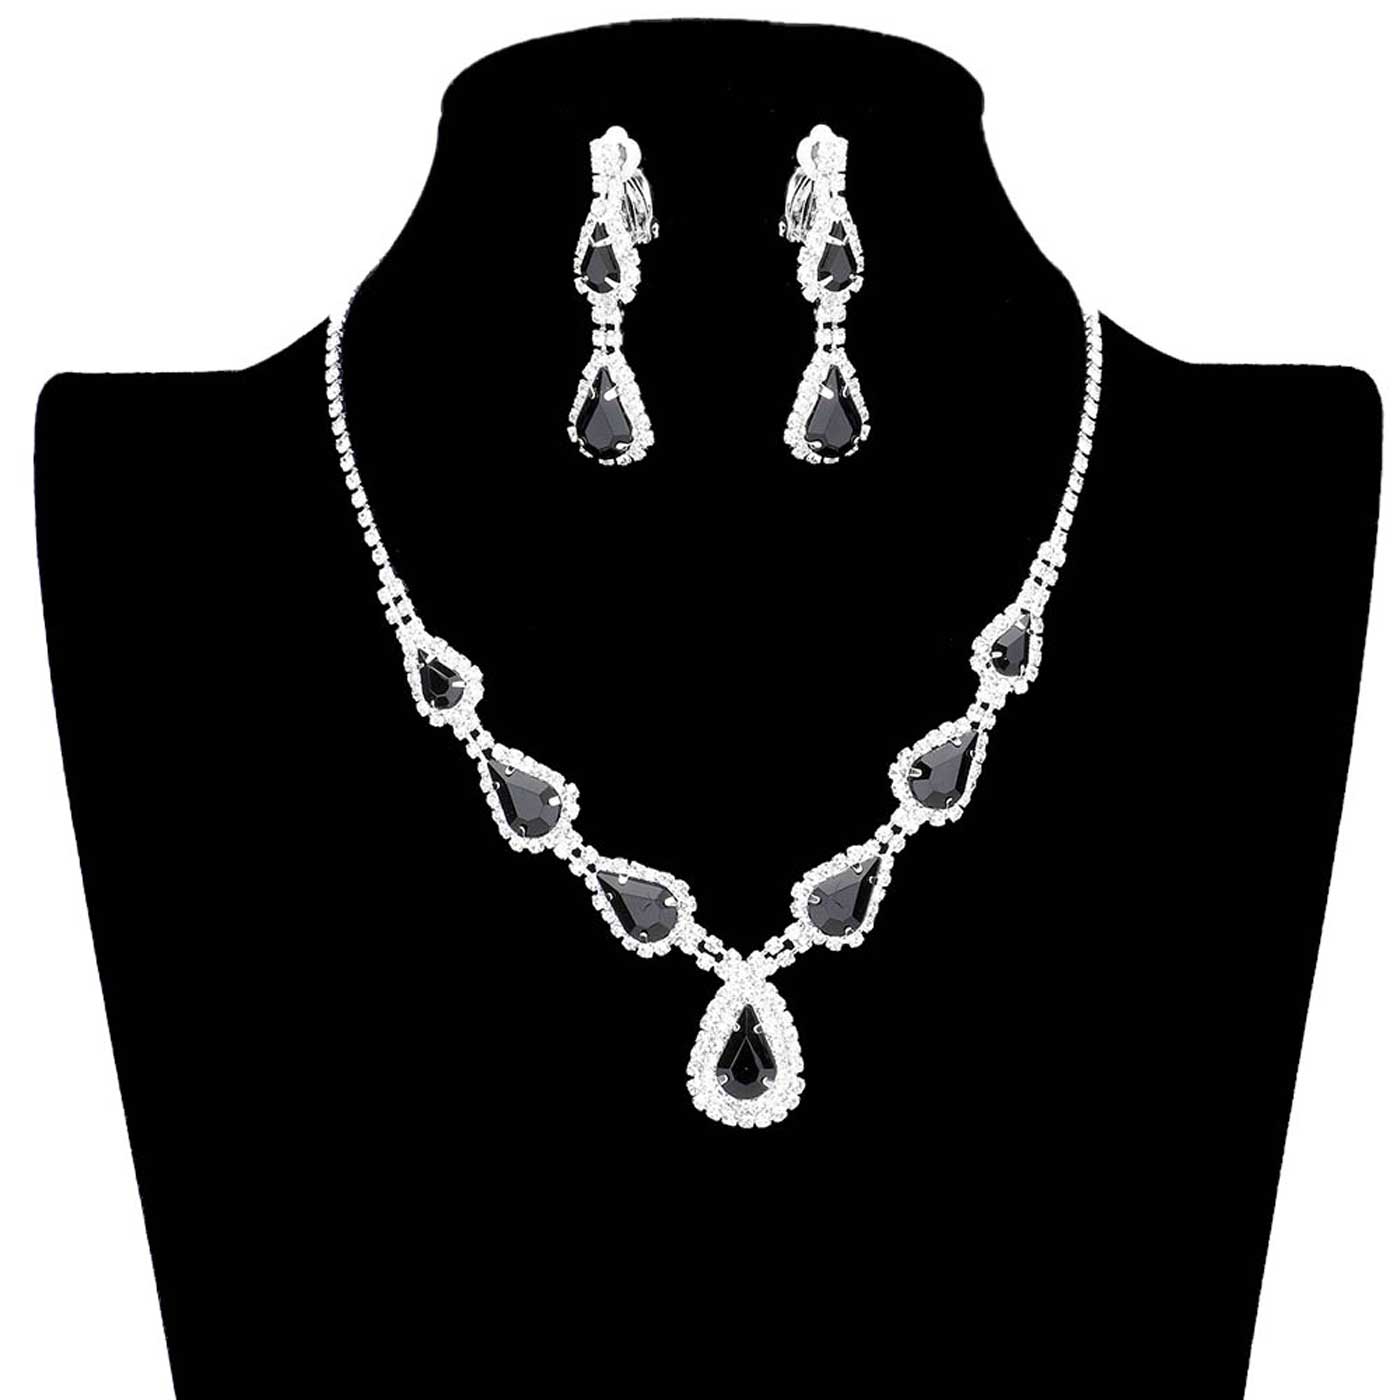 Jet Black Teardrop Stone Accented Rhinestone Pave Necklace, brings a gorgeous glow to your outfit to show off the royalty on any special occasion. These gorgeous Rhinestone pieces will show your class in any special occasion. The elegance of these Rhinestone goes unmatched, great for wearing at a party! Perfect jewelry to enhance your look. Awesome gift for birthday, Anniversary or any special occasion.